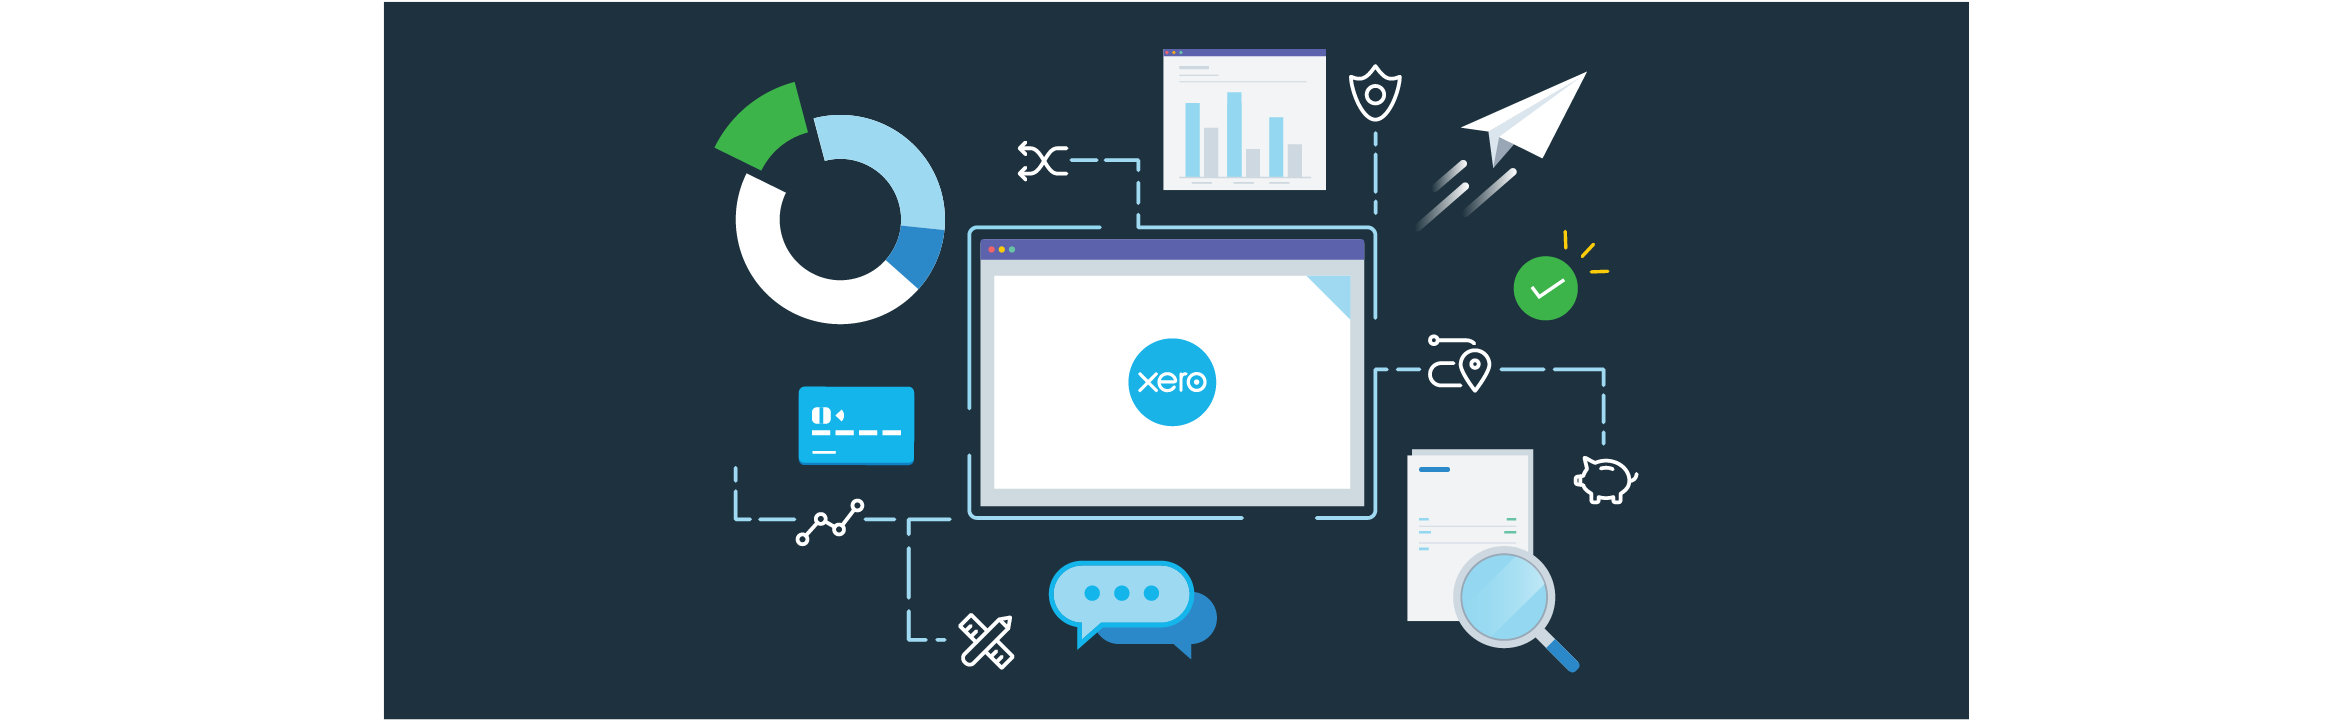 Illustration of Xero on a computer screen, with charts and icons swirling around